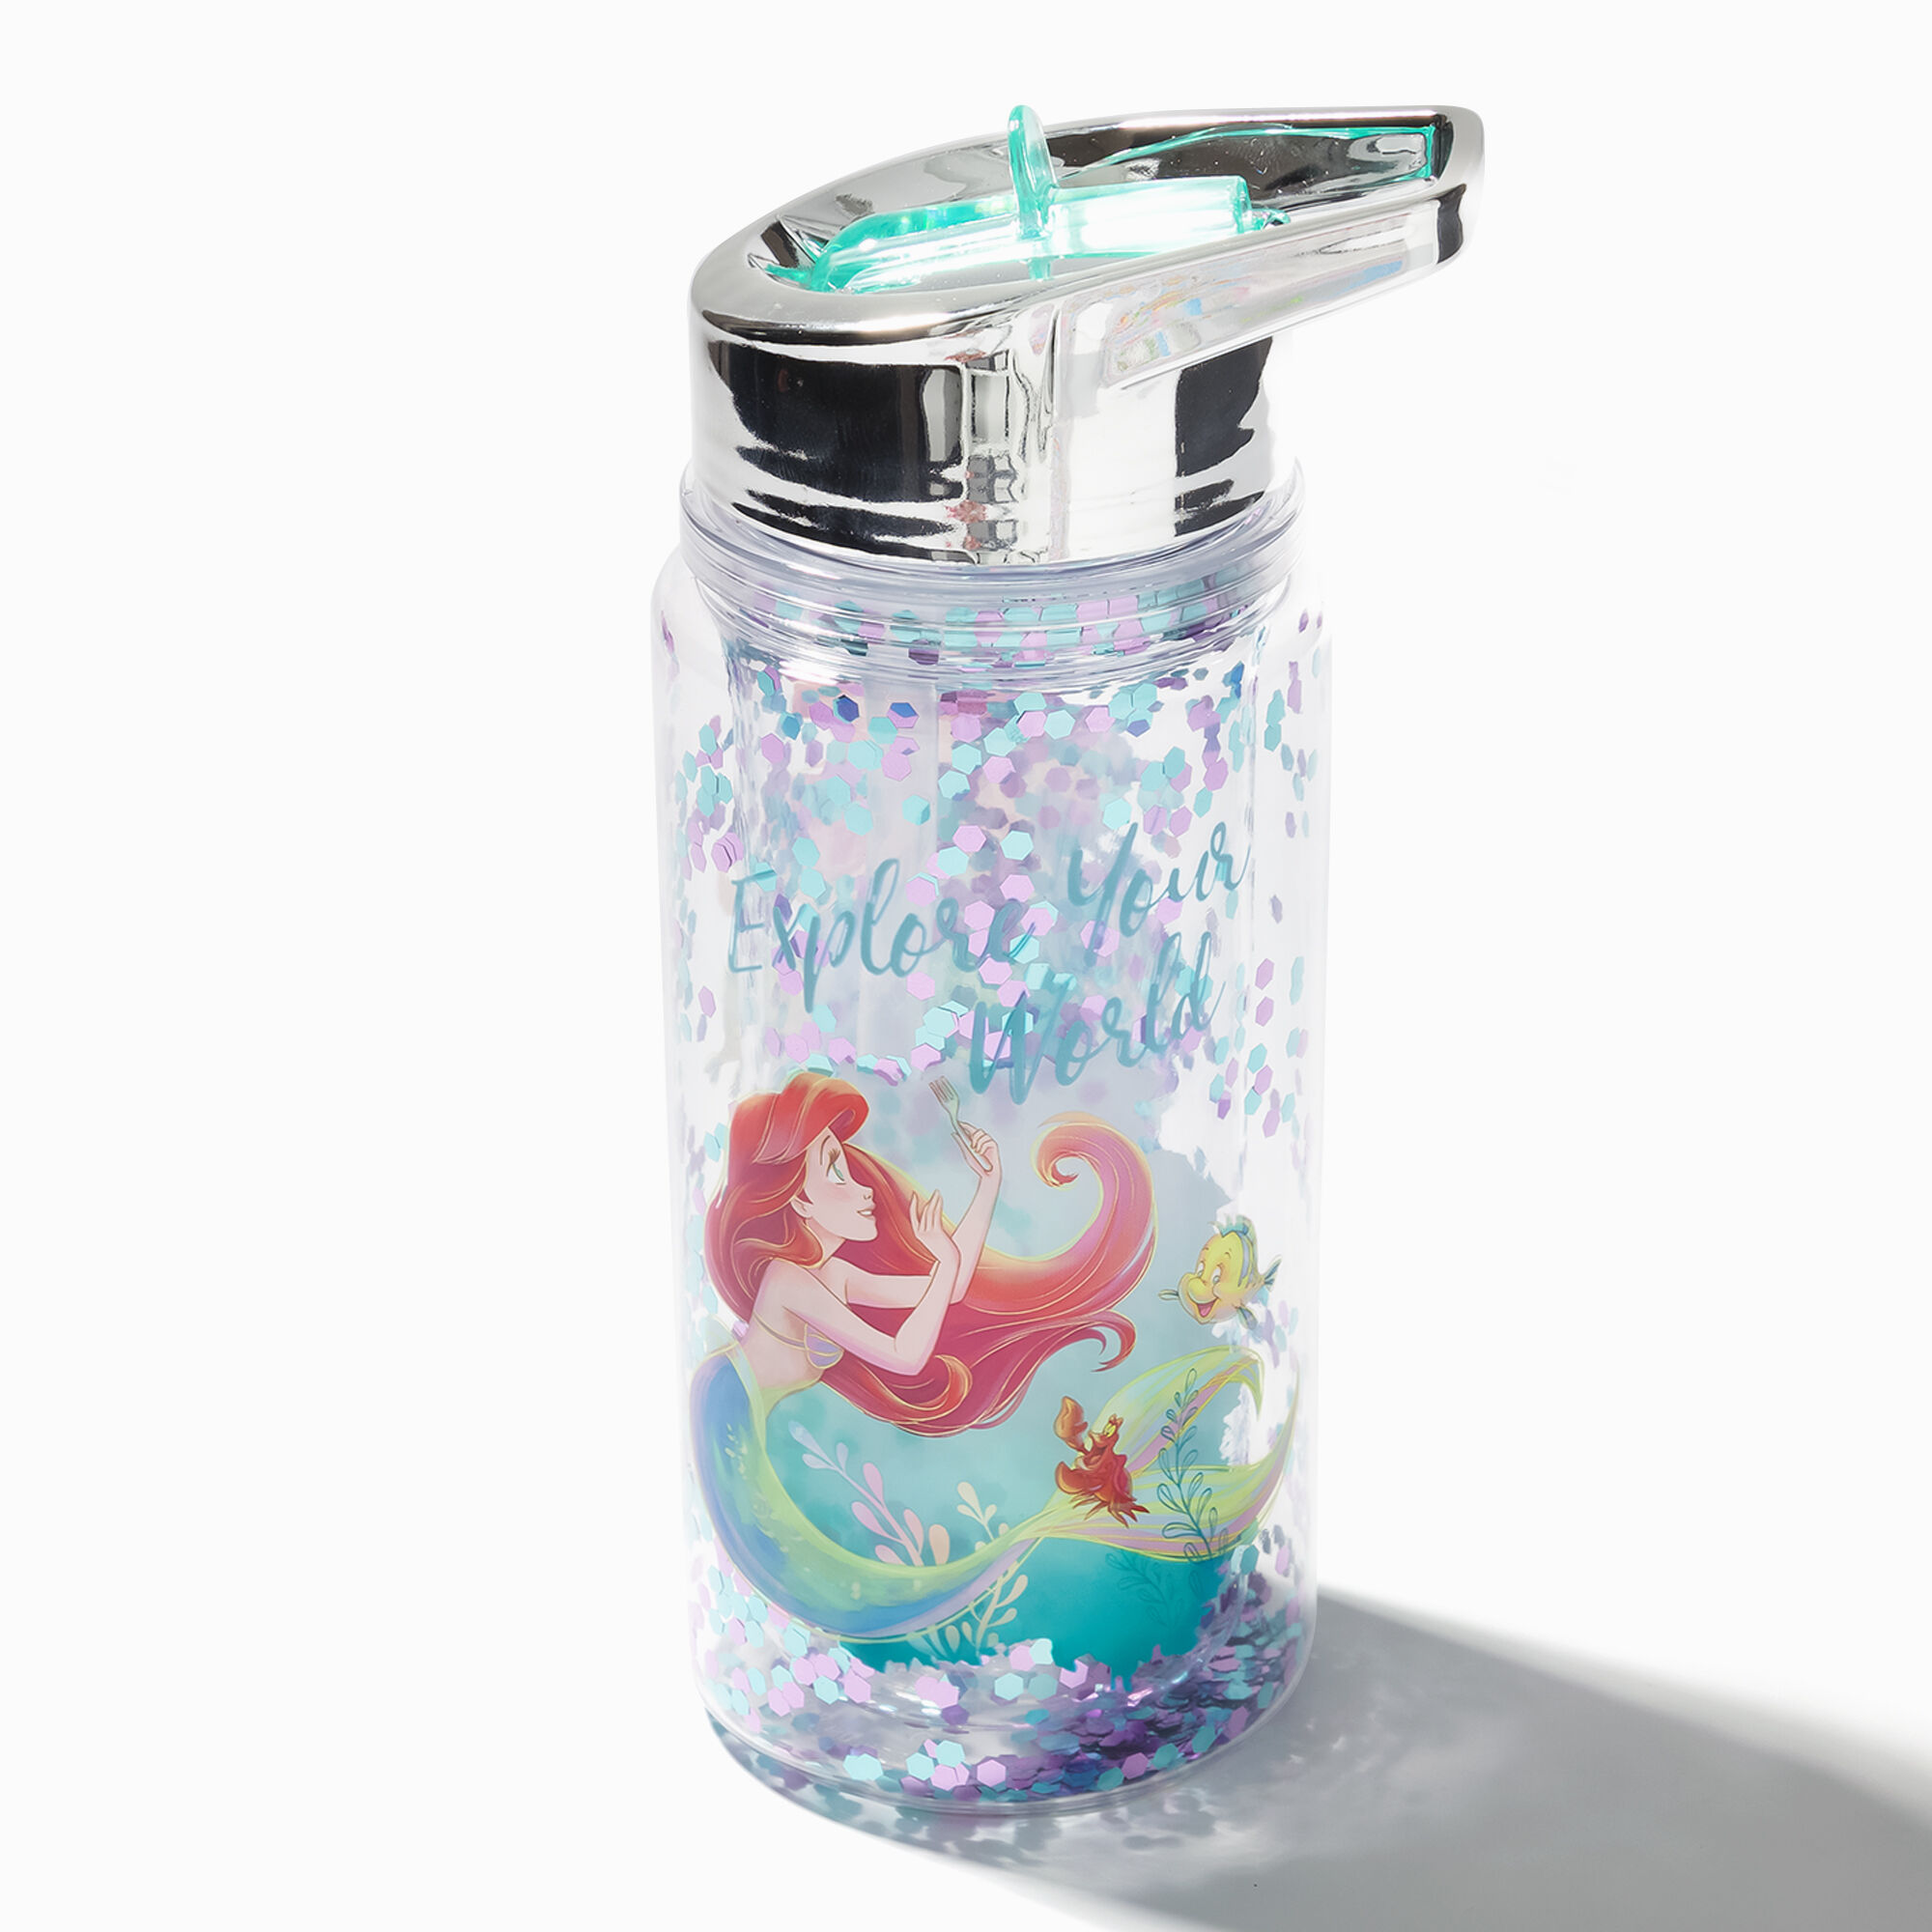 View Claires Disney Princess The Little Mermaid Arial Glitter Water Bottle Blue information